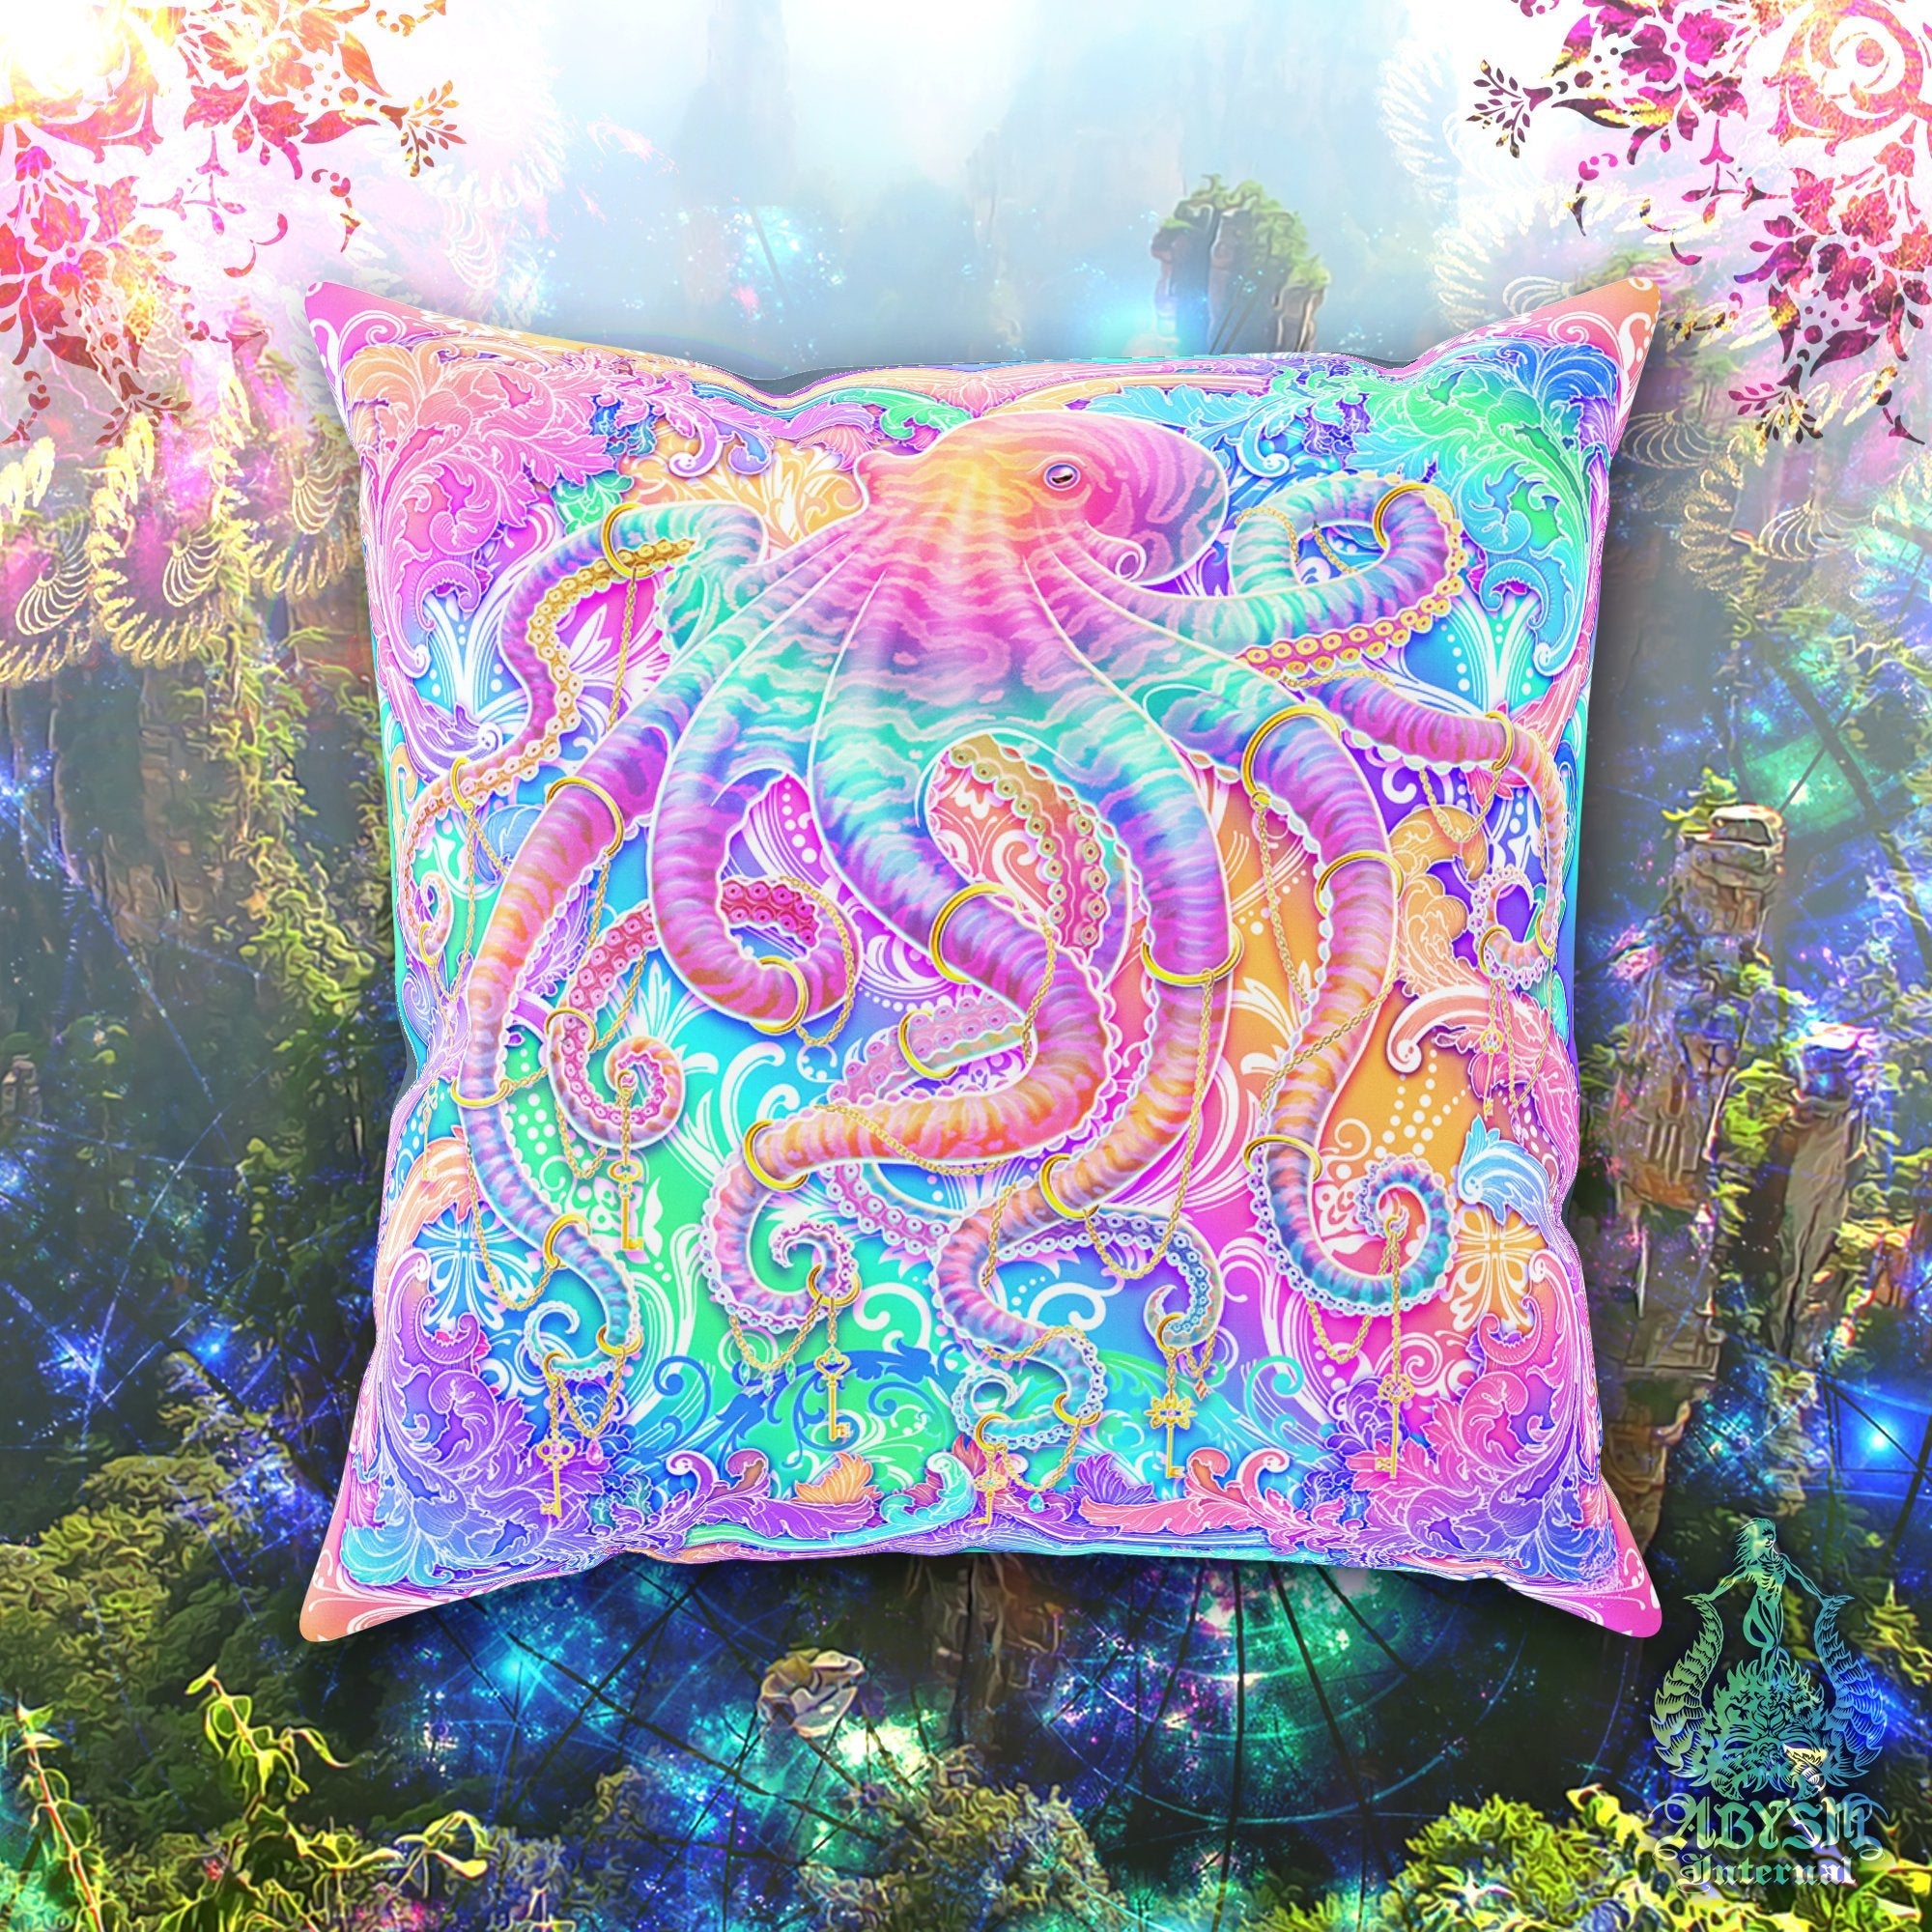 Pastel Throw Pillow, Decorative Accent Cushion, Aesthetic and Holographic Decor, Fairy Kei and Yume Kawaii style, Funky and Eclectic Home - Psychedelic, Octopus - Abysm Internal